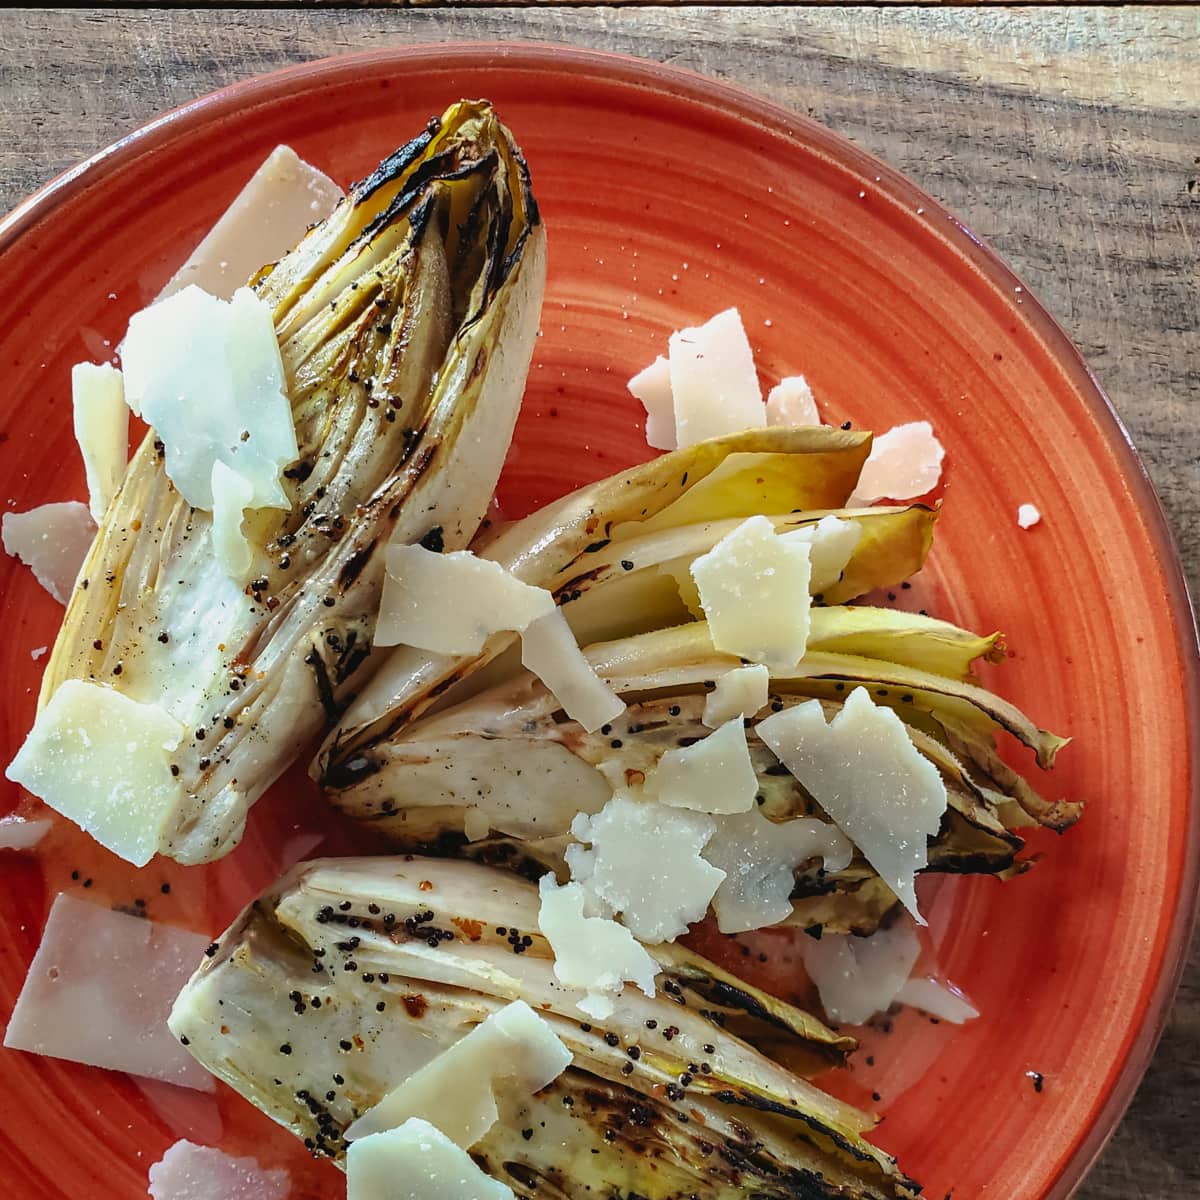 Summer salad with grilled endive and poopy seed dressing.